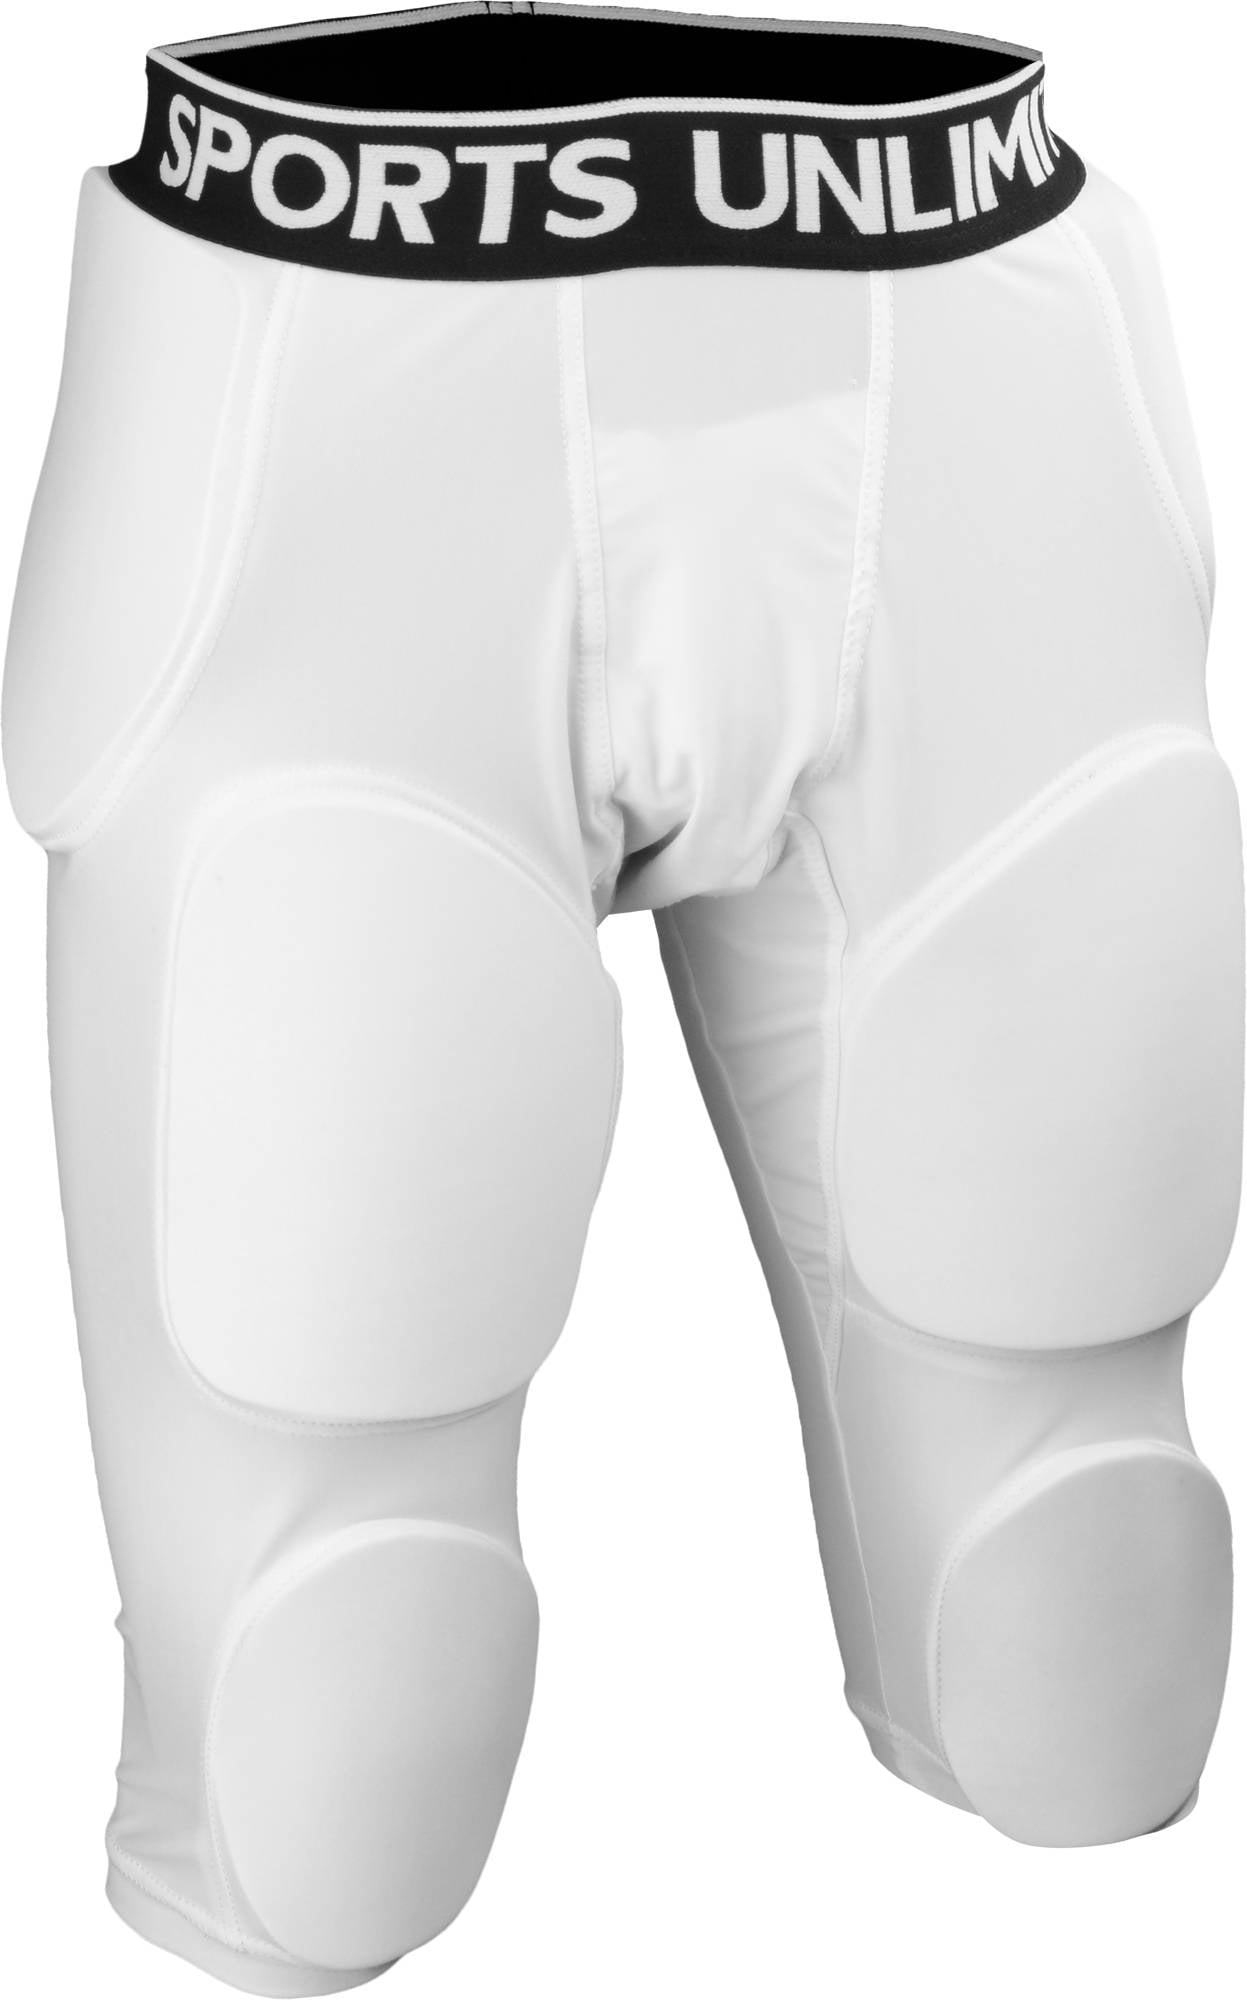 CHAMPRO Formation 5-Pad Integrated Football Girdle 